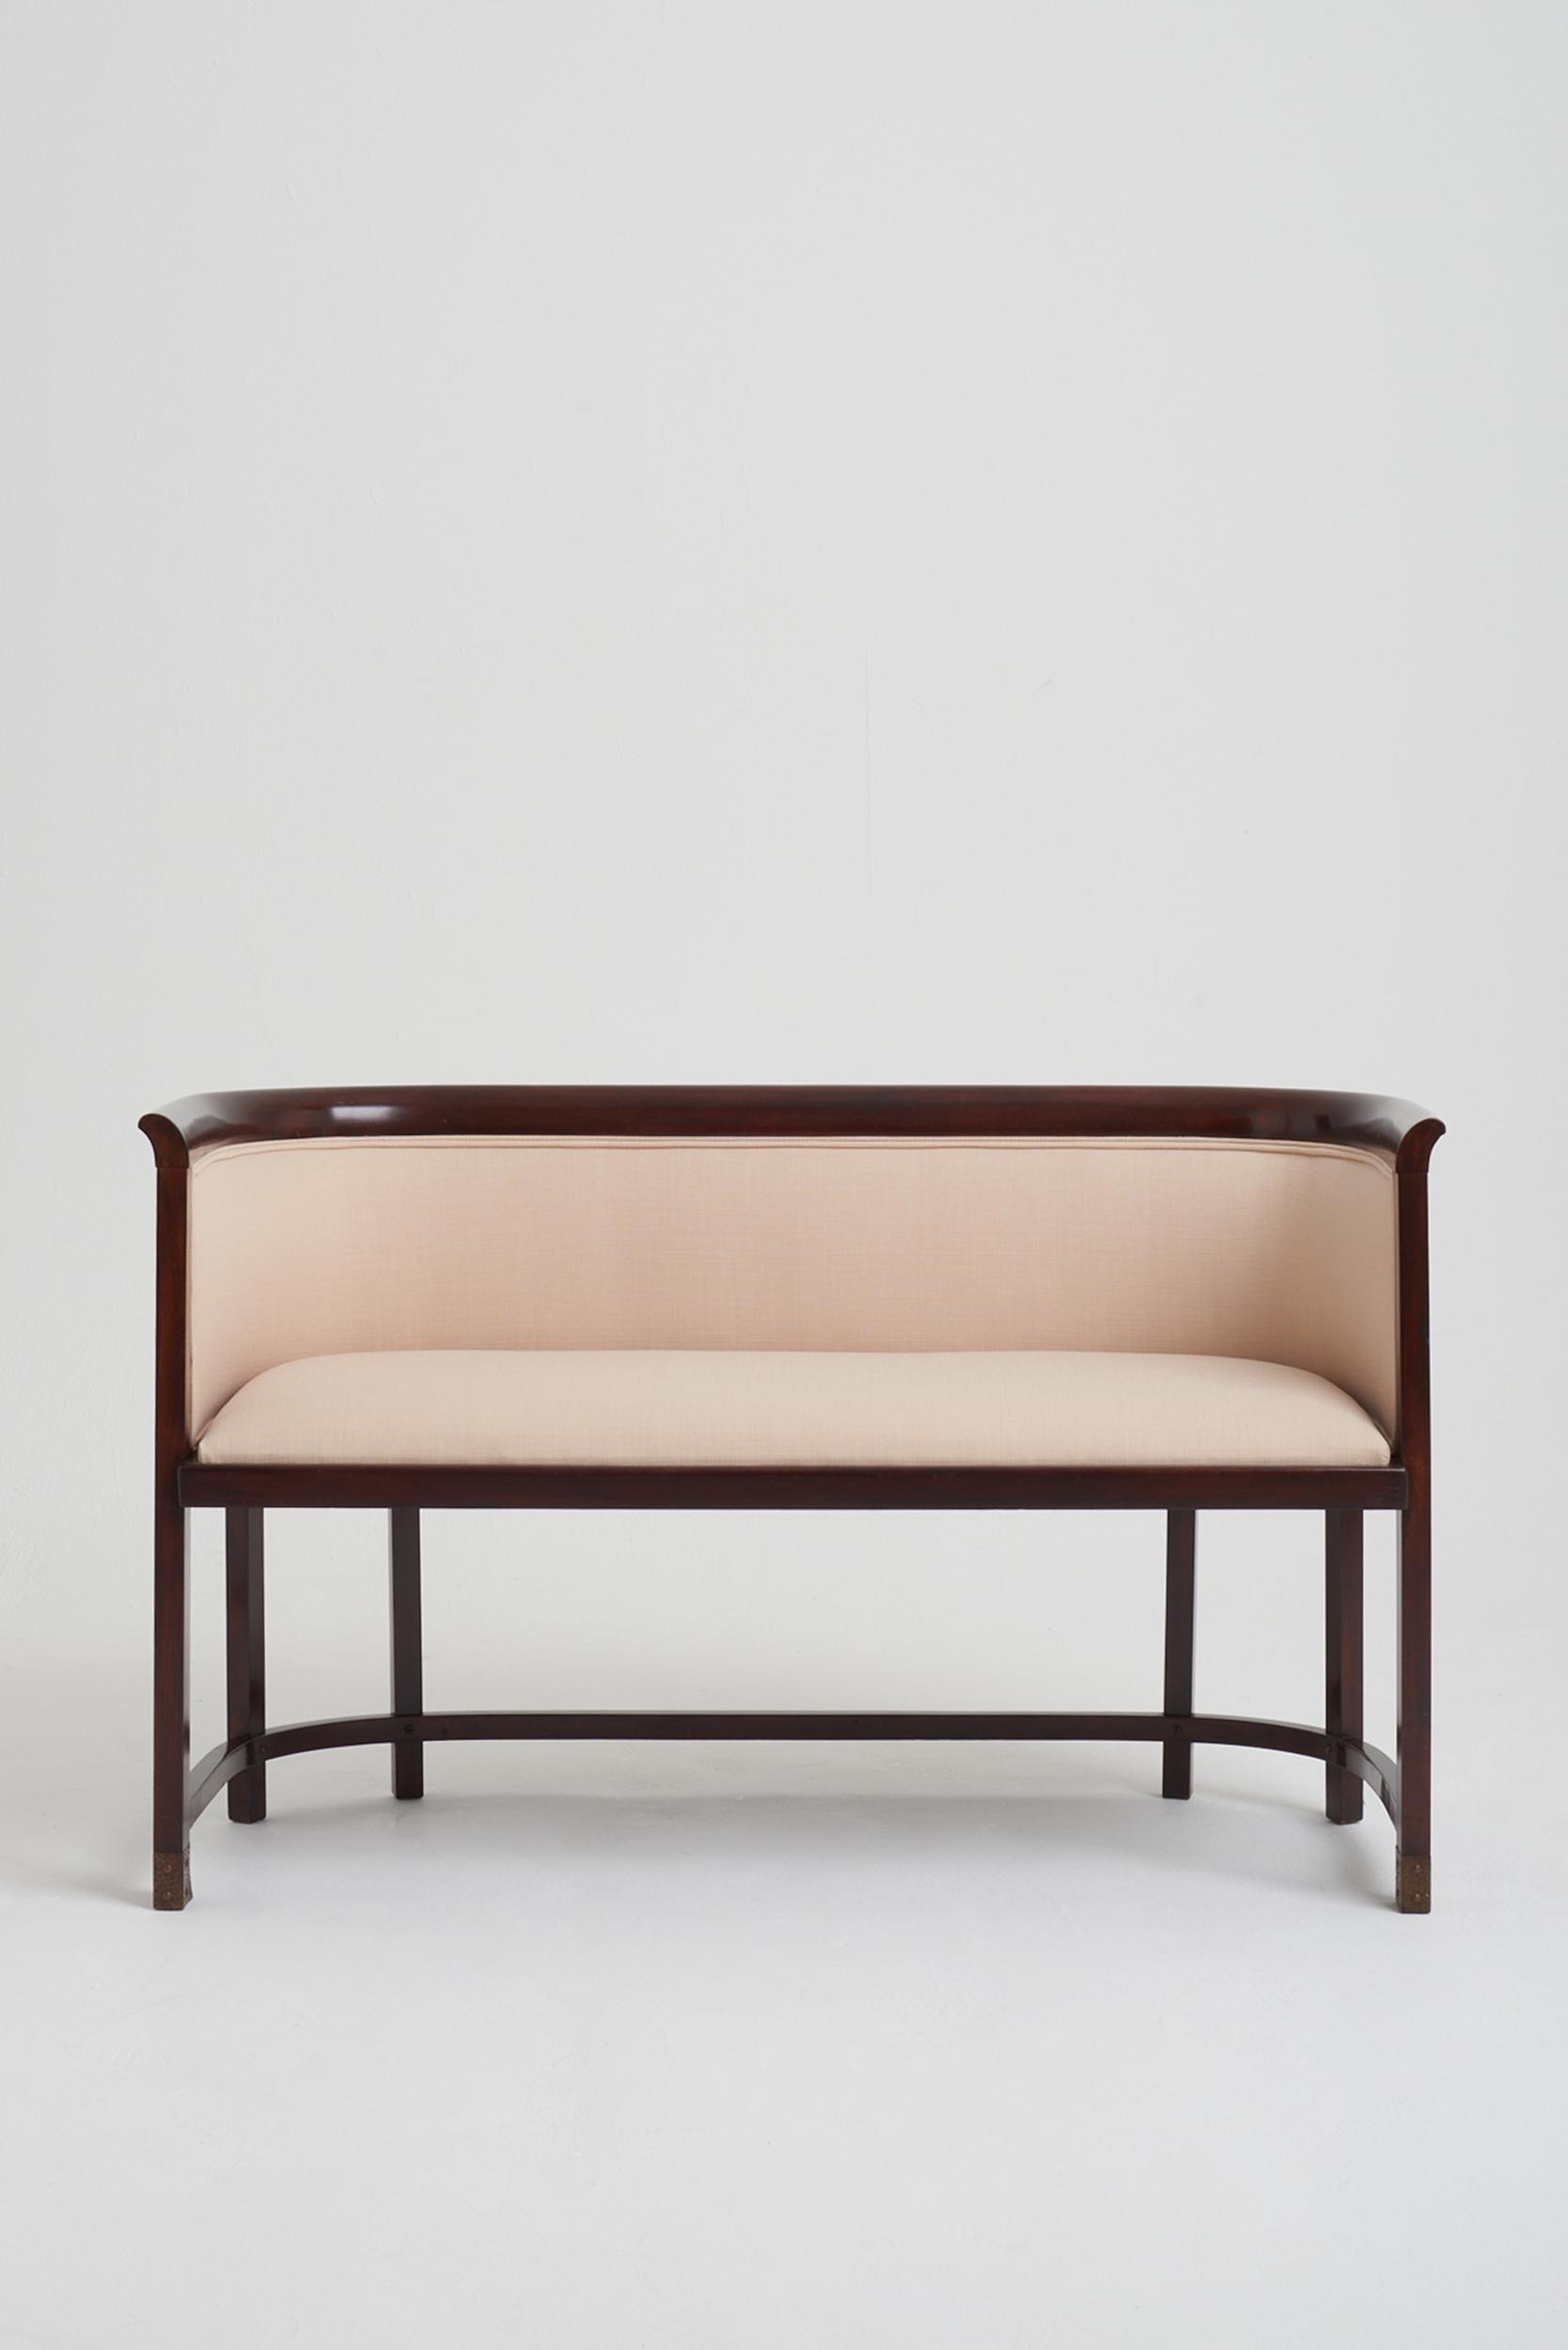 A Vienna Secession settee, most probably by Joseph Hoffman (1870-1956) for J. & J. Kohn.
Beech frame with hammered copper feet, newly upholstered. 
Austria, Circa 1900.